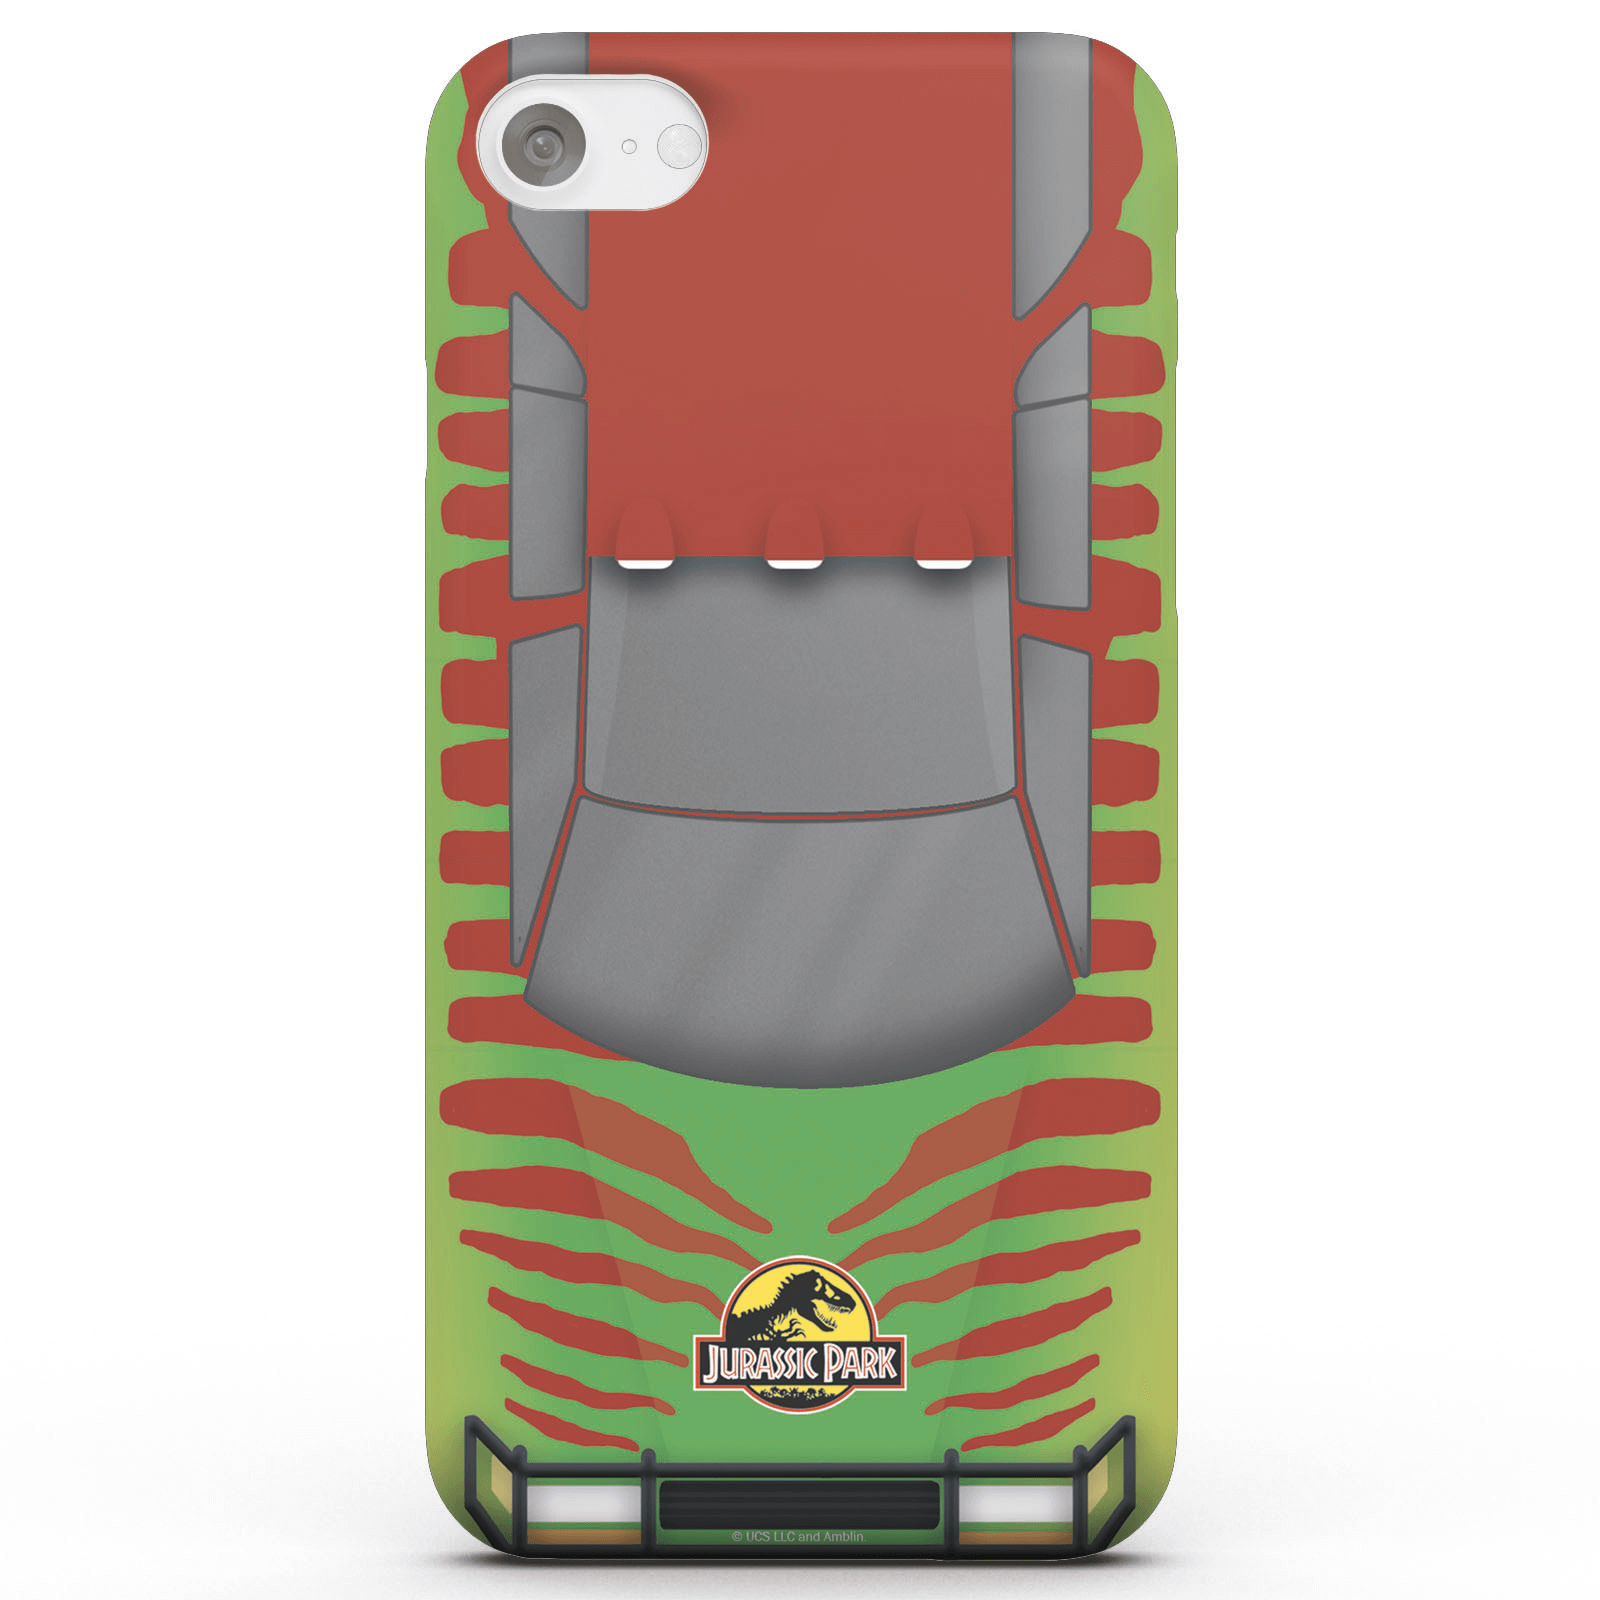 Photos - Case Jurassic Park Tour Car Phone  for iPhone and Android - Samsung S10 - S